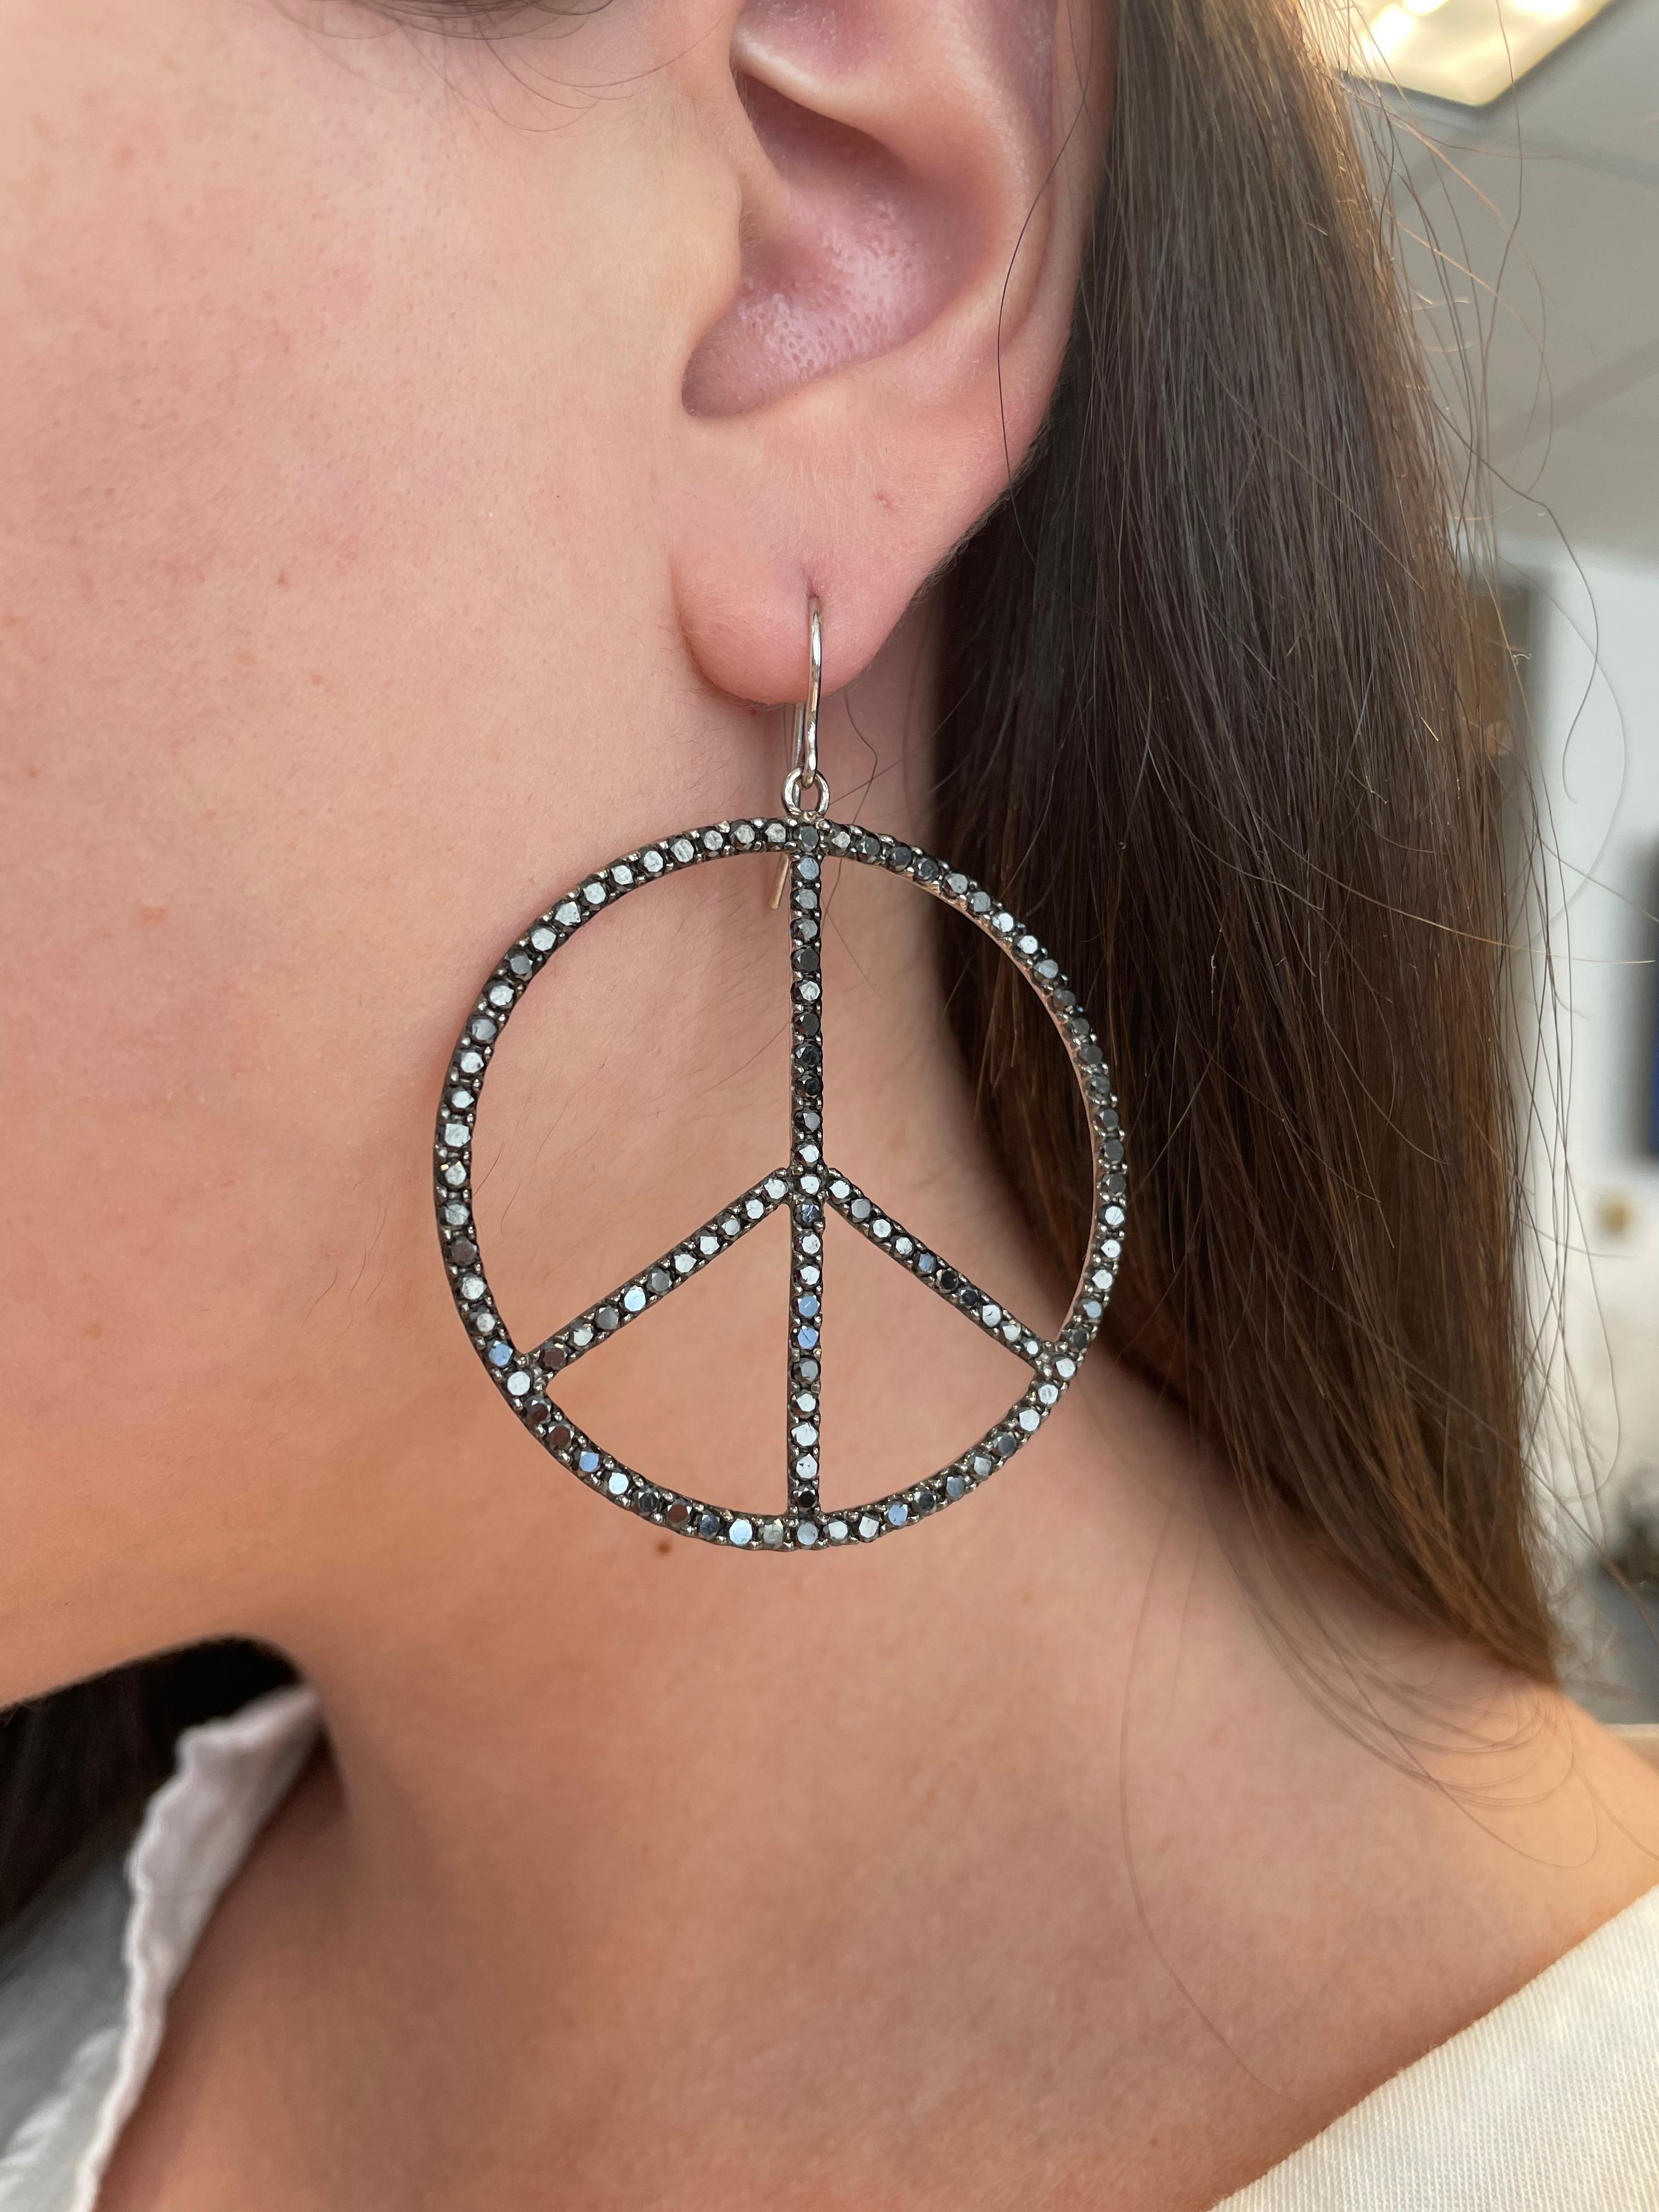 Statement black diamond peace sign earrings.
7.40ct of round black diamonds, 18-karat white gold. 
Accommodated with an up to date appraisal by a GIA G.G. upon request. Please contact us with any questions.

Item number
E3404